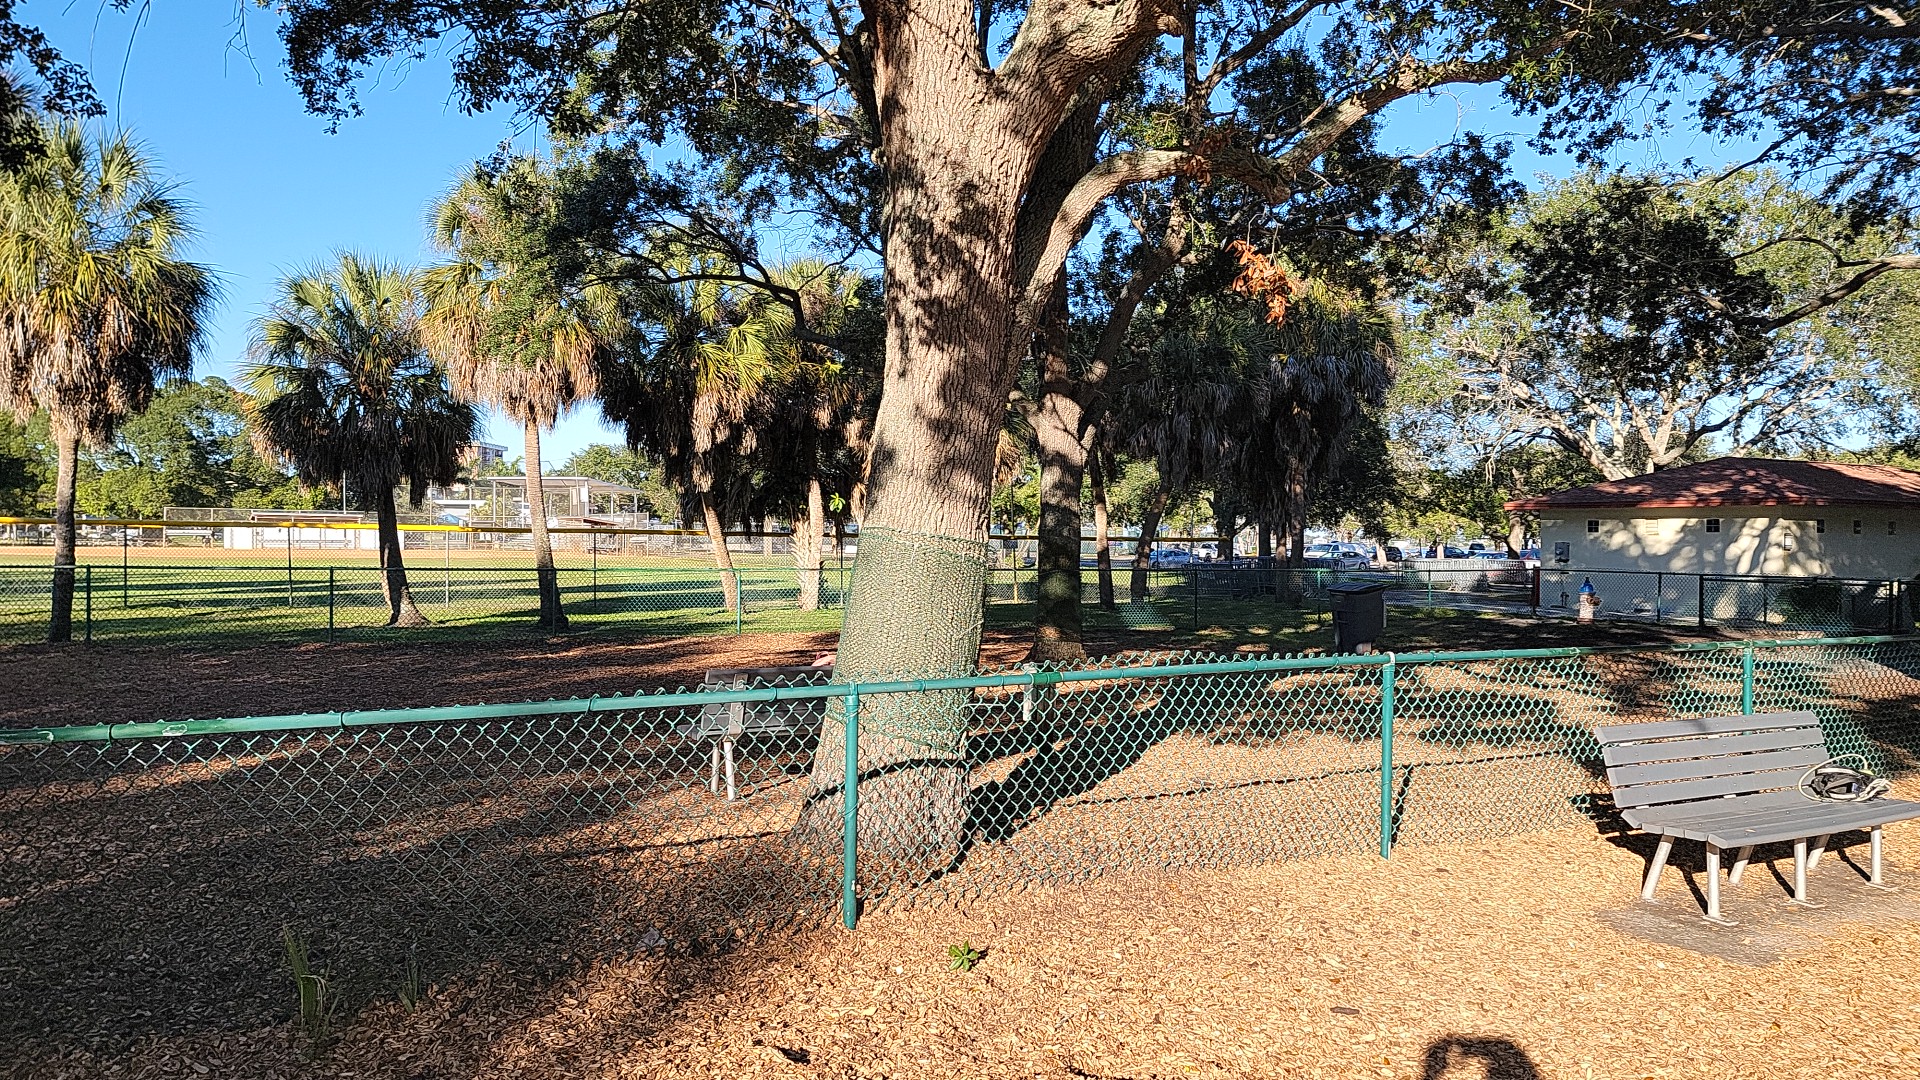 Small Dogs Park at the Vinoy Park of St petersburg - FL